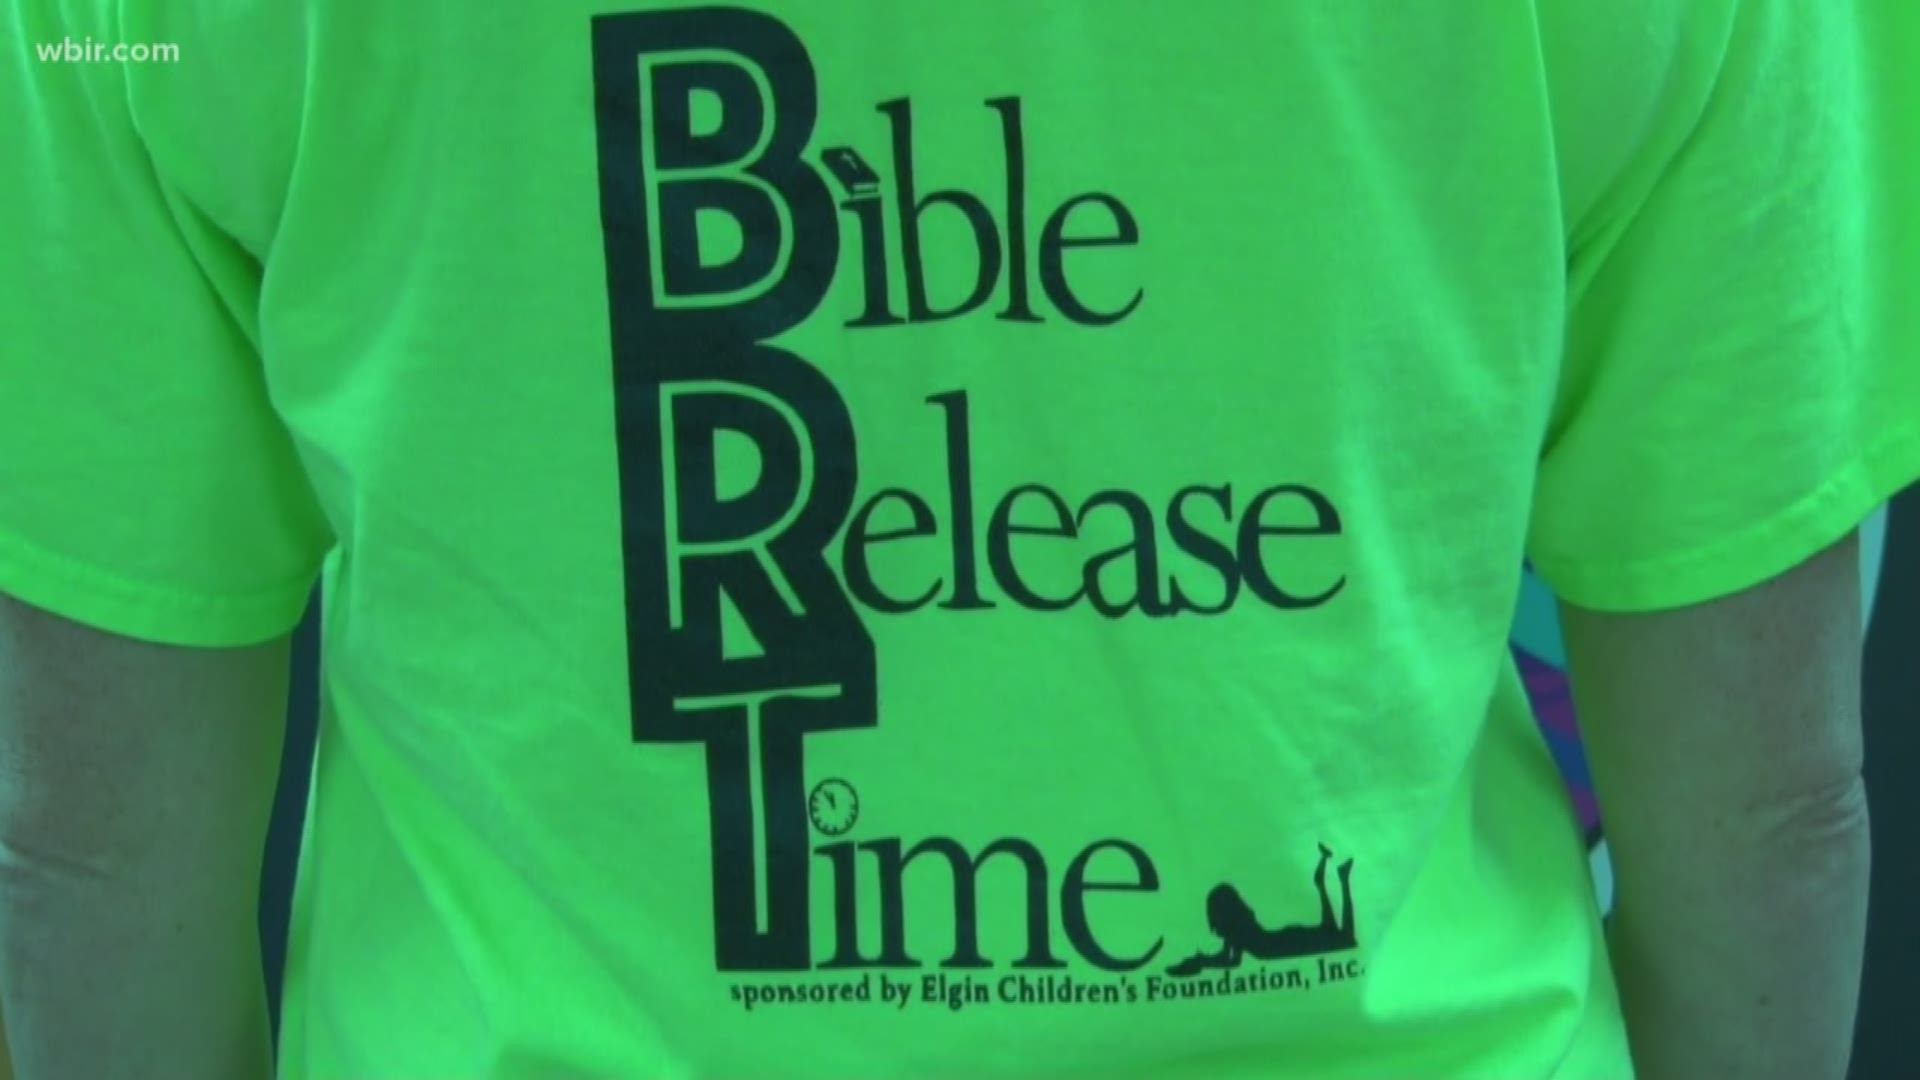 The Bible release program is only being offered at Sterchi Elementary for now.